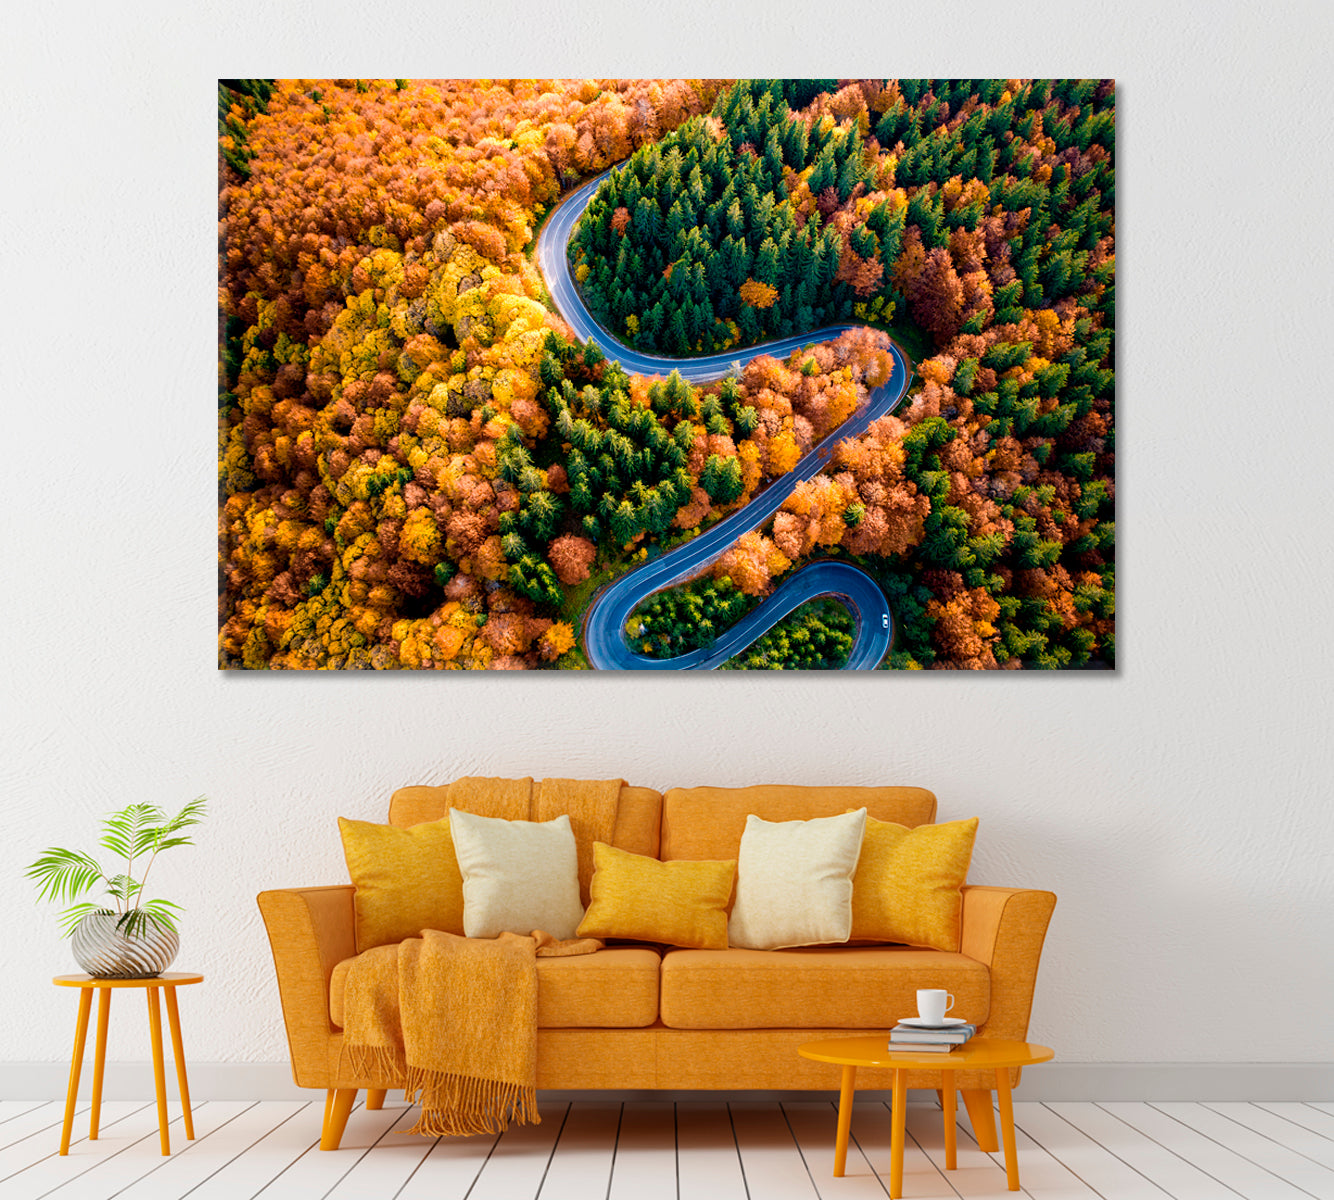 Road In Autumn Forest Canvas Print ArtLexy 1 Panel 24"x16" inches 